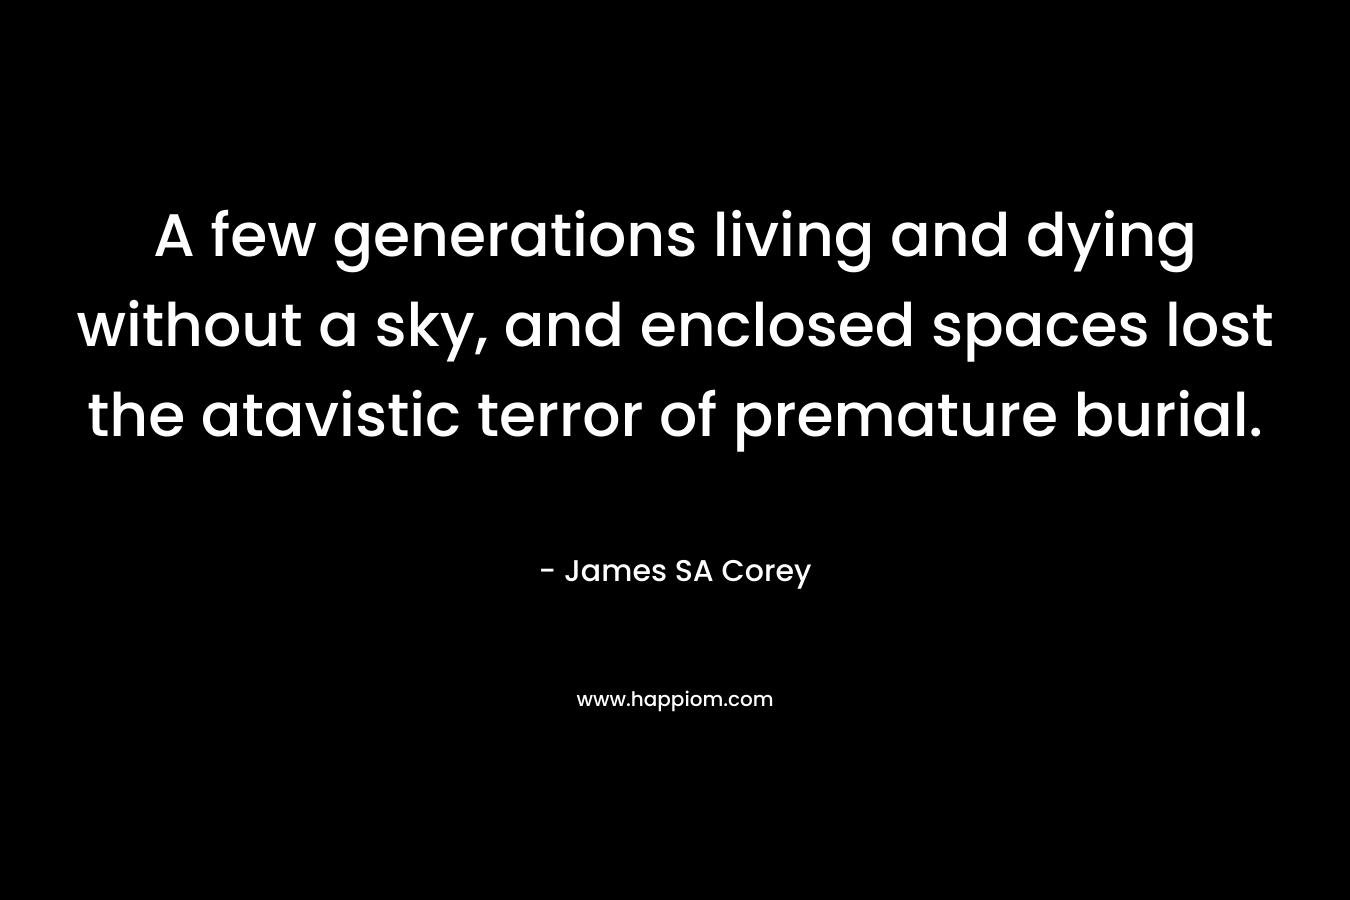 A few generations living and dying without a sky, and enclosed spaces lost the atavistic terror of premature burial.